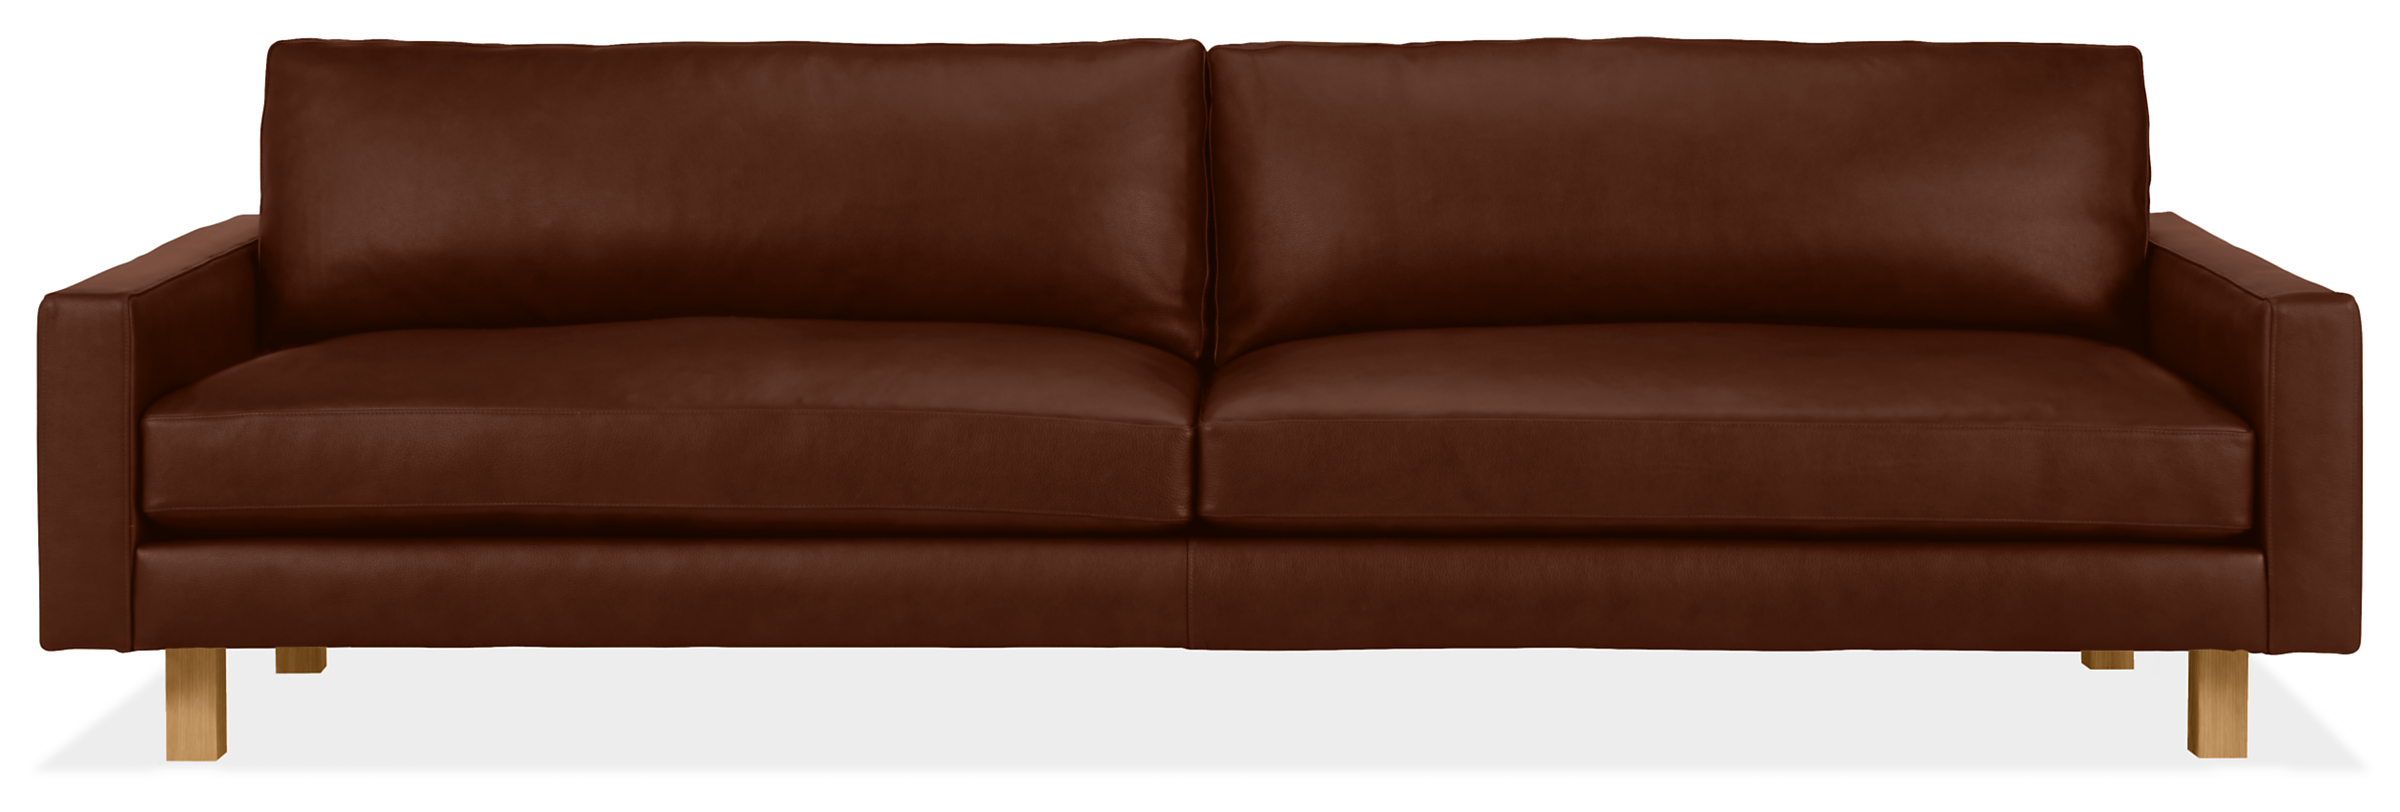 Pierson 102" Sofa with Wood Base/Legs